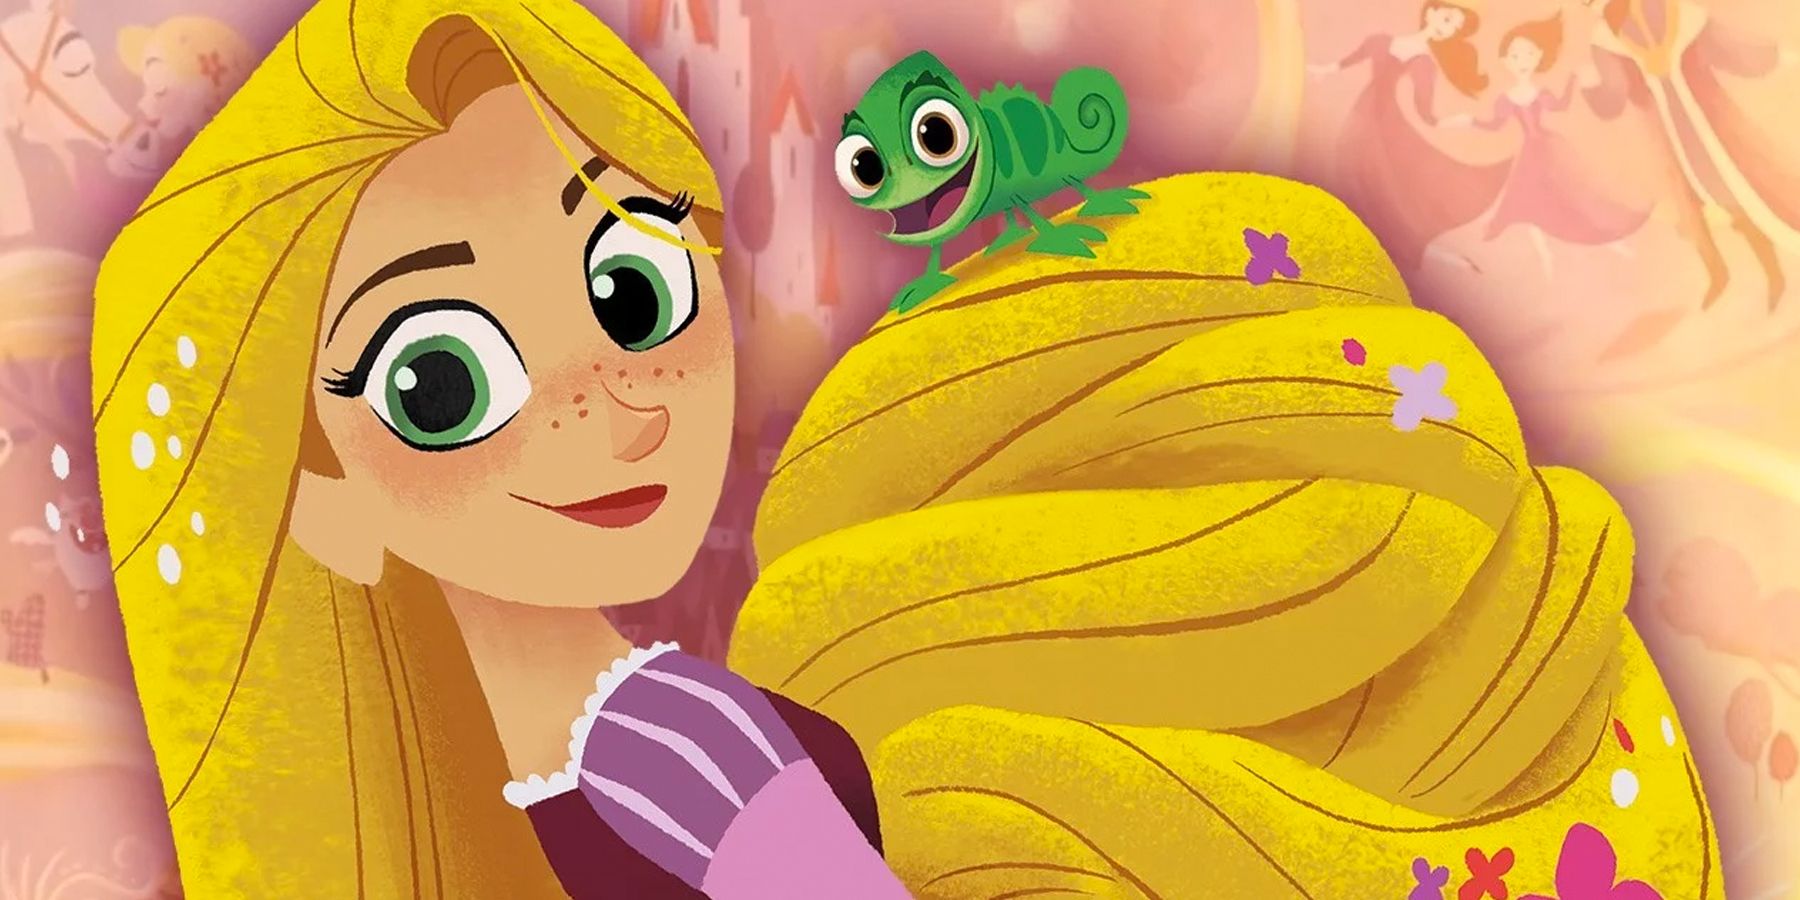 Rapunzel and Pascal smiling in Tangled the Animated Series.